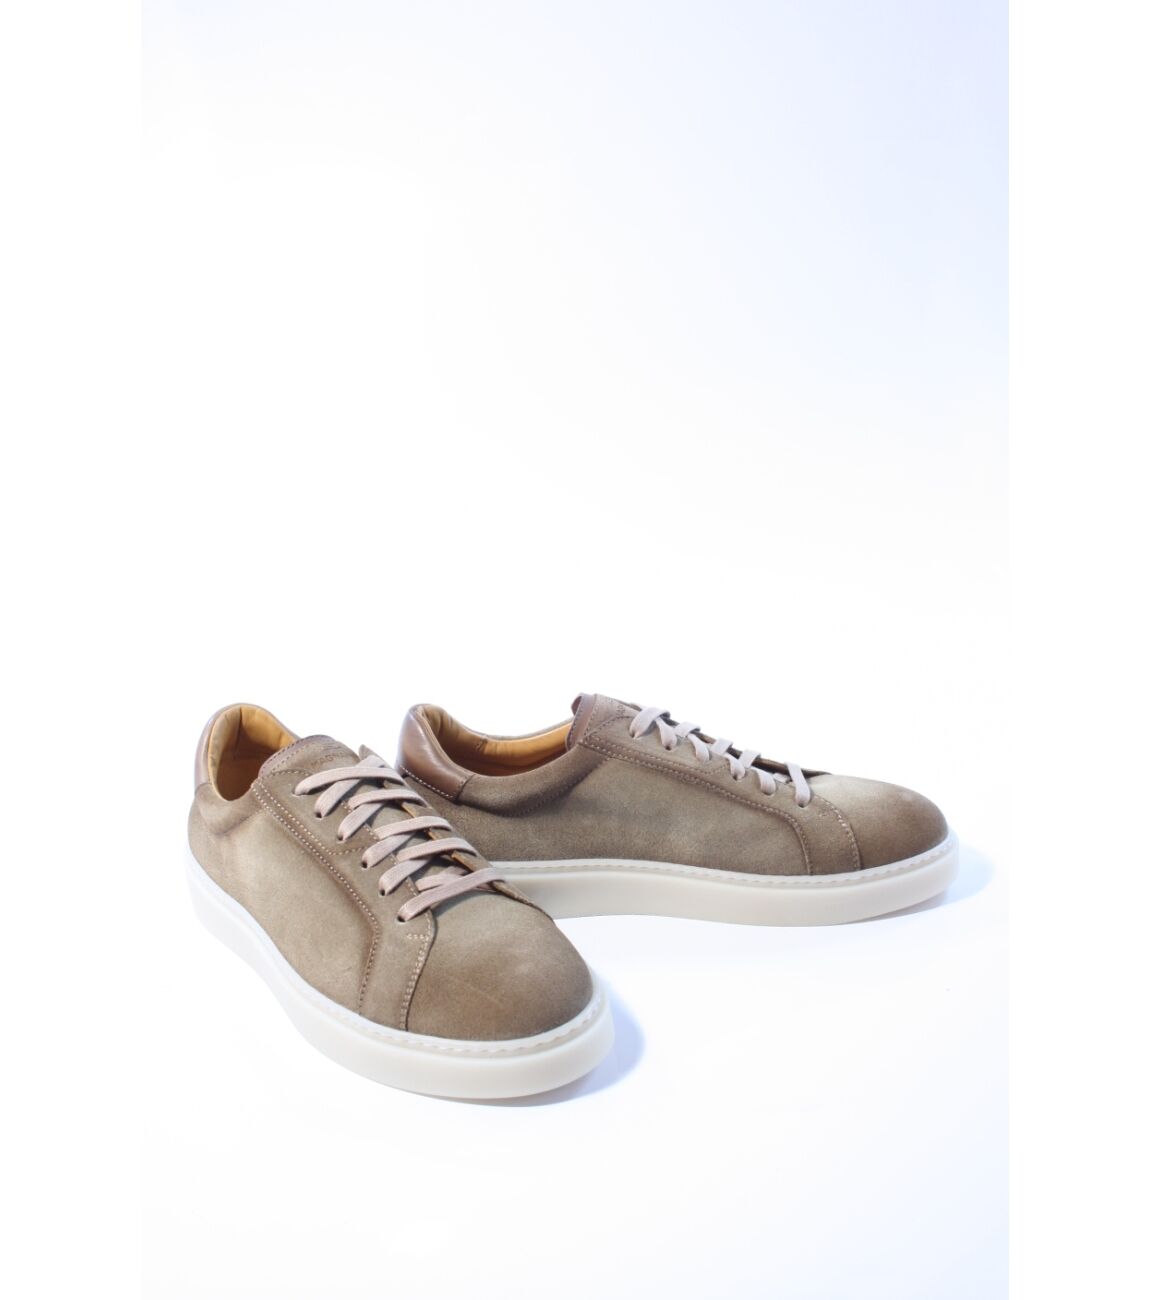 Magnanni Heren sneakers taupe 42